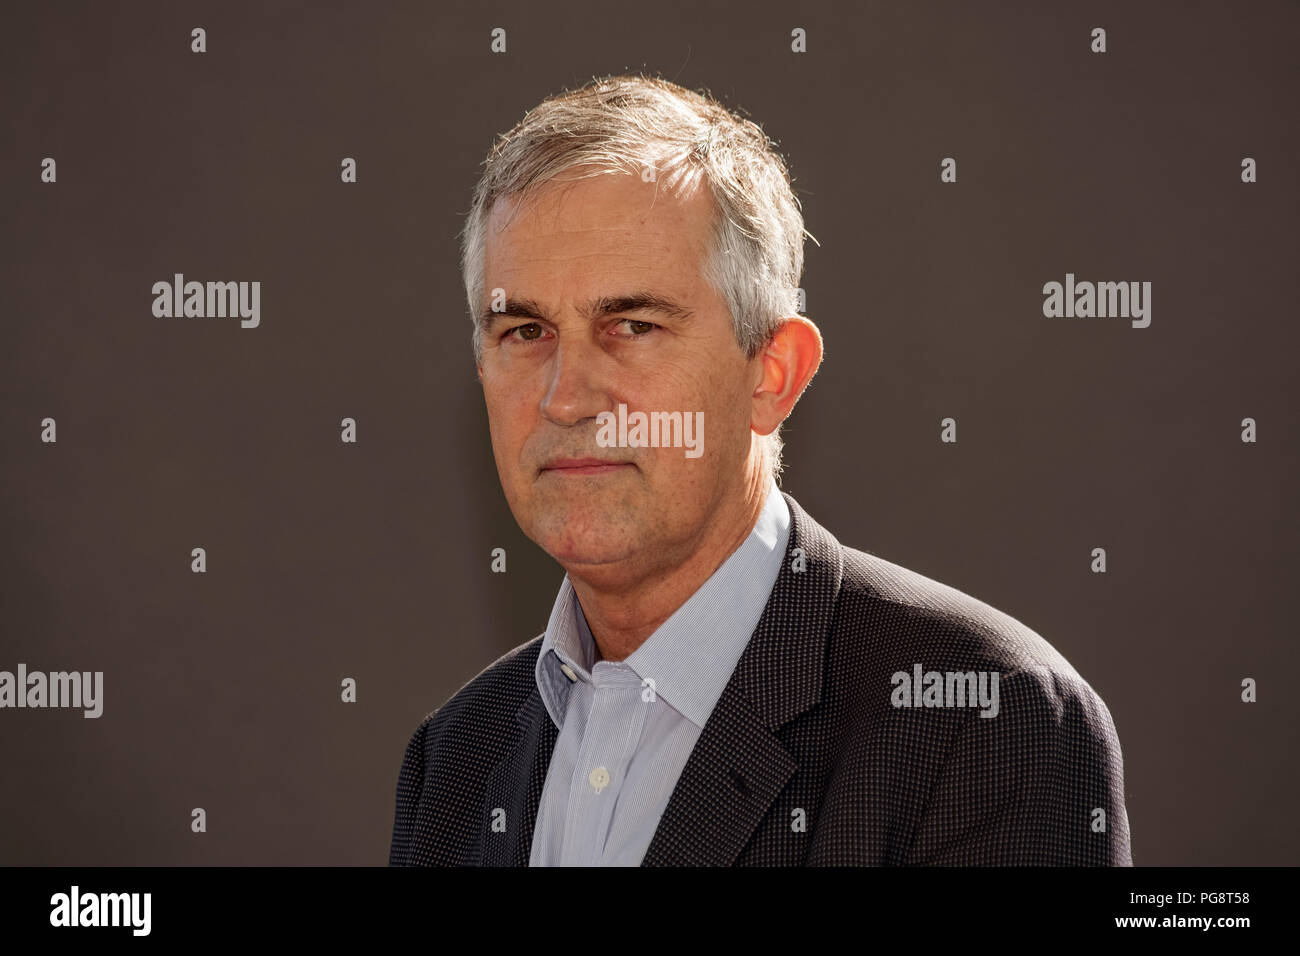 Edinburgh, Scotland, UK. 25 August, 2018. Pictured; Victor Mallet, Financial Times Asia News Editor has closely studied the iconic waterway and his latest research shows an environmental crisis of vast proportions. Credit: Iain Masterton/Alamy Live News Stock Photo